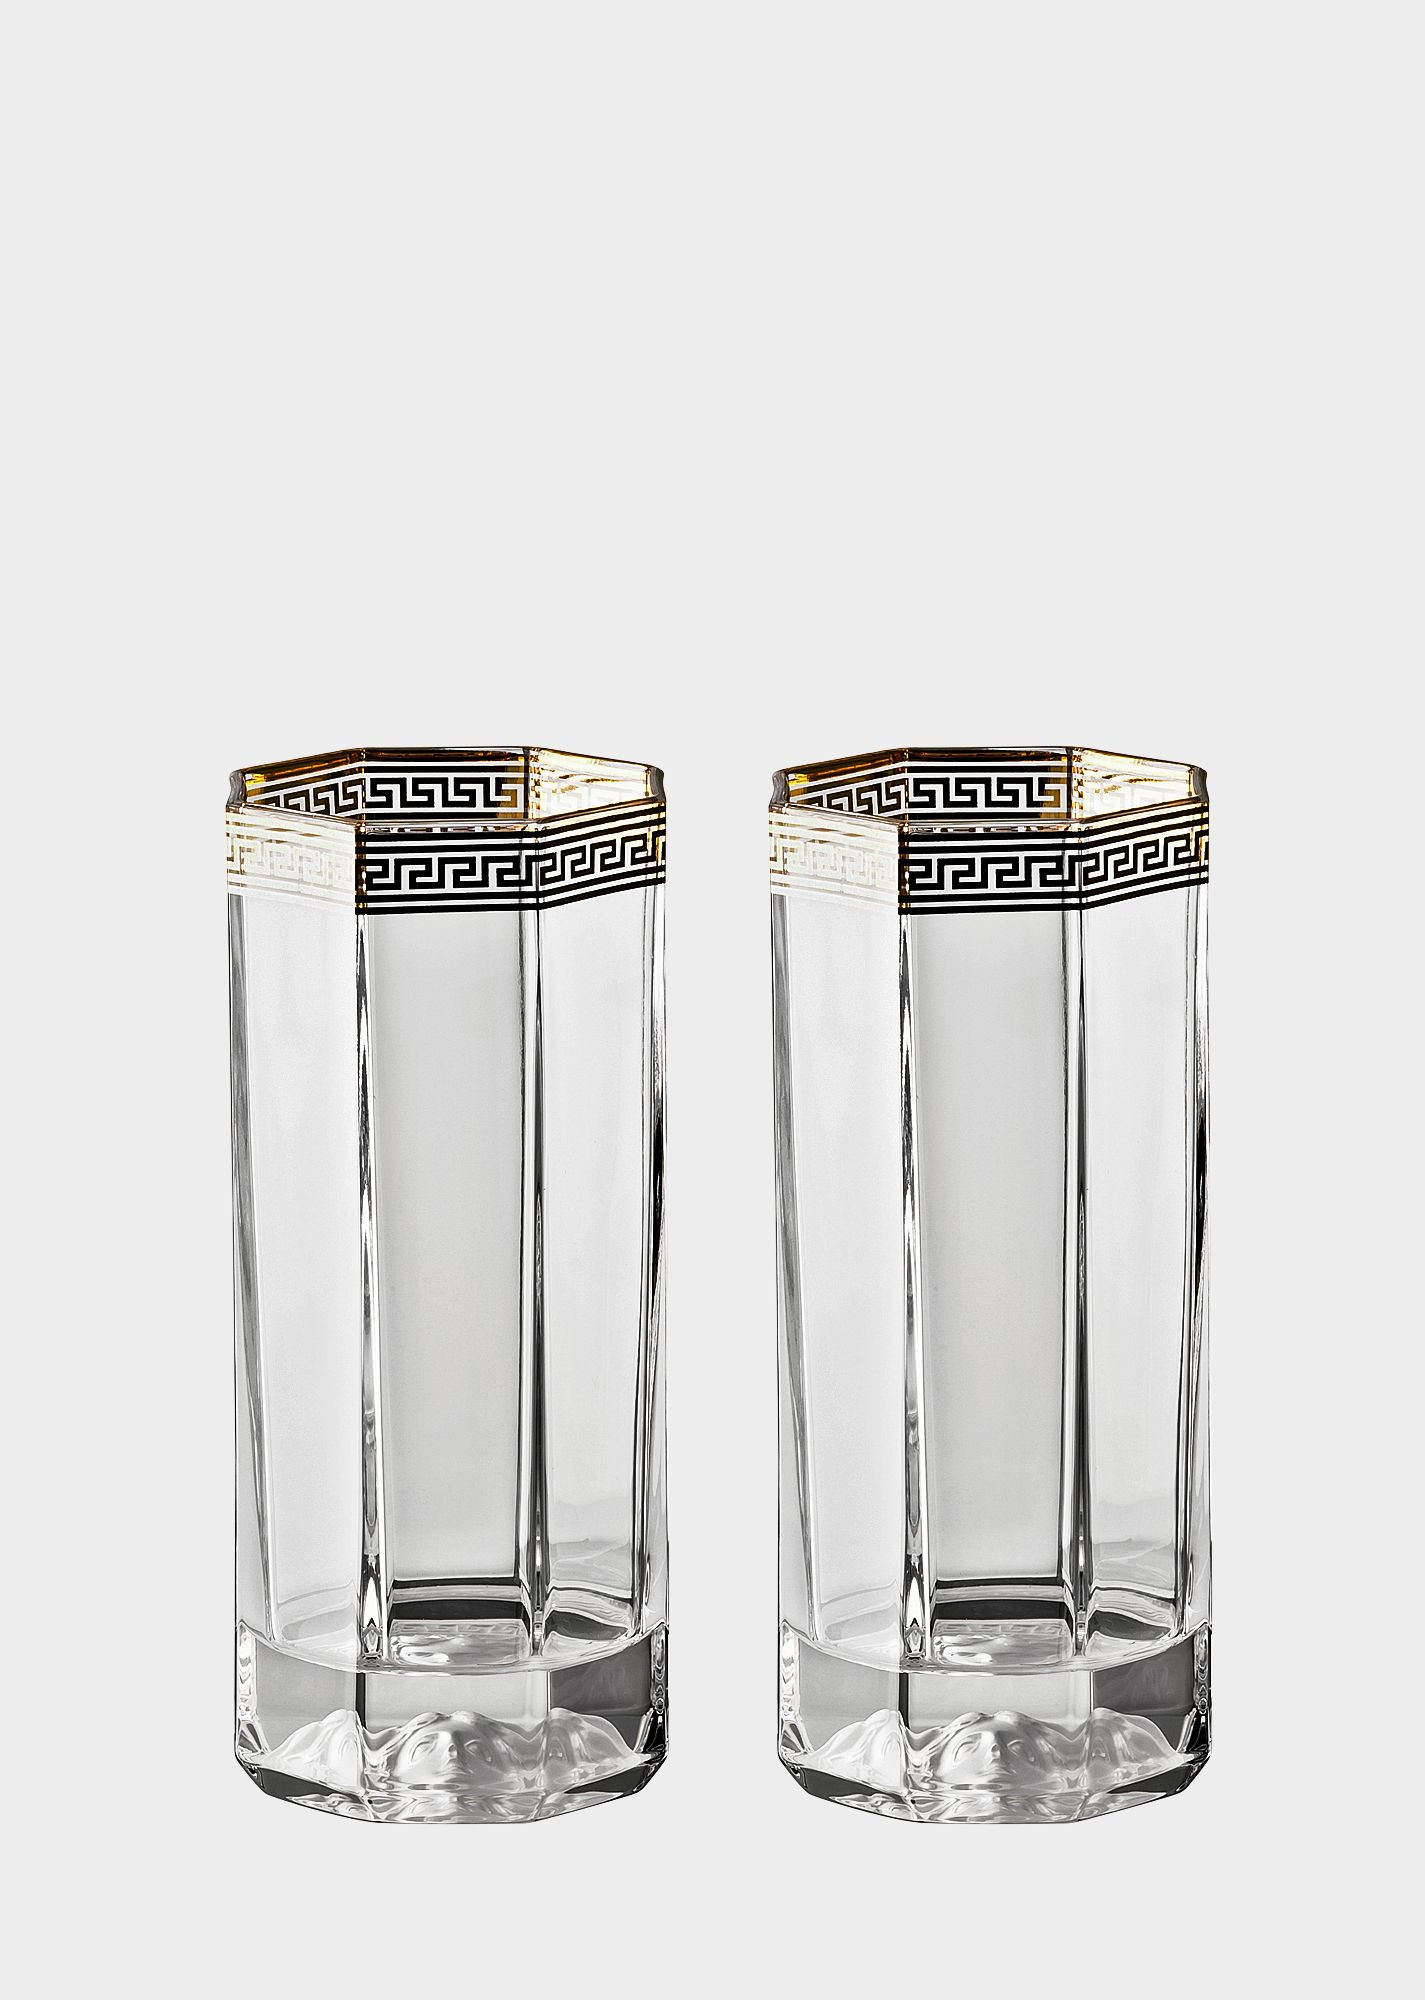 22 Unique Lenox Lead Crystal Vase 2024 free download lenox lead crystal vase of 21 crystal glass vase the weekly world pertaining to versace home luxury glass crystal